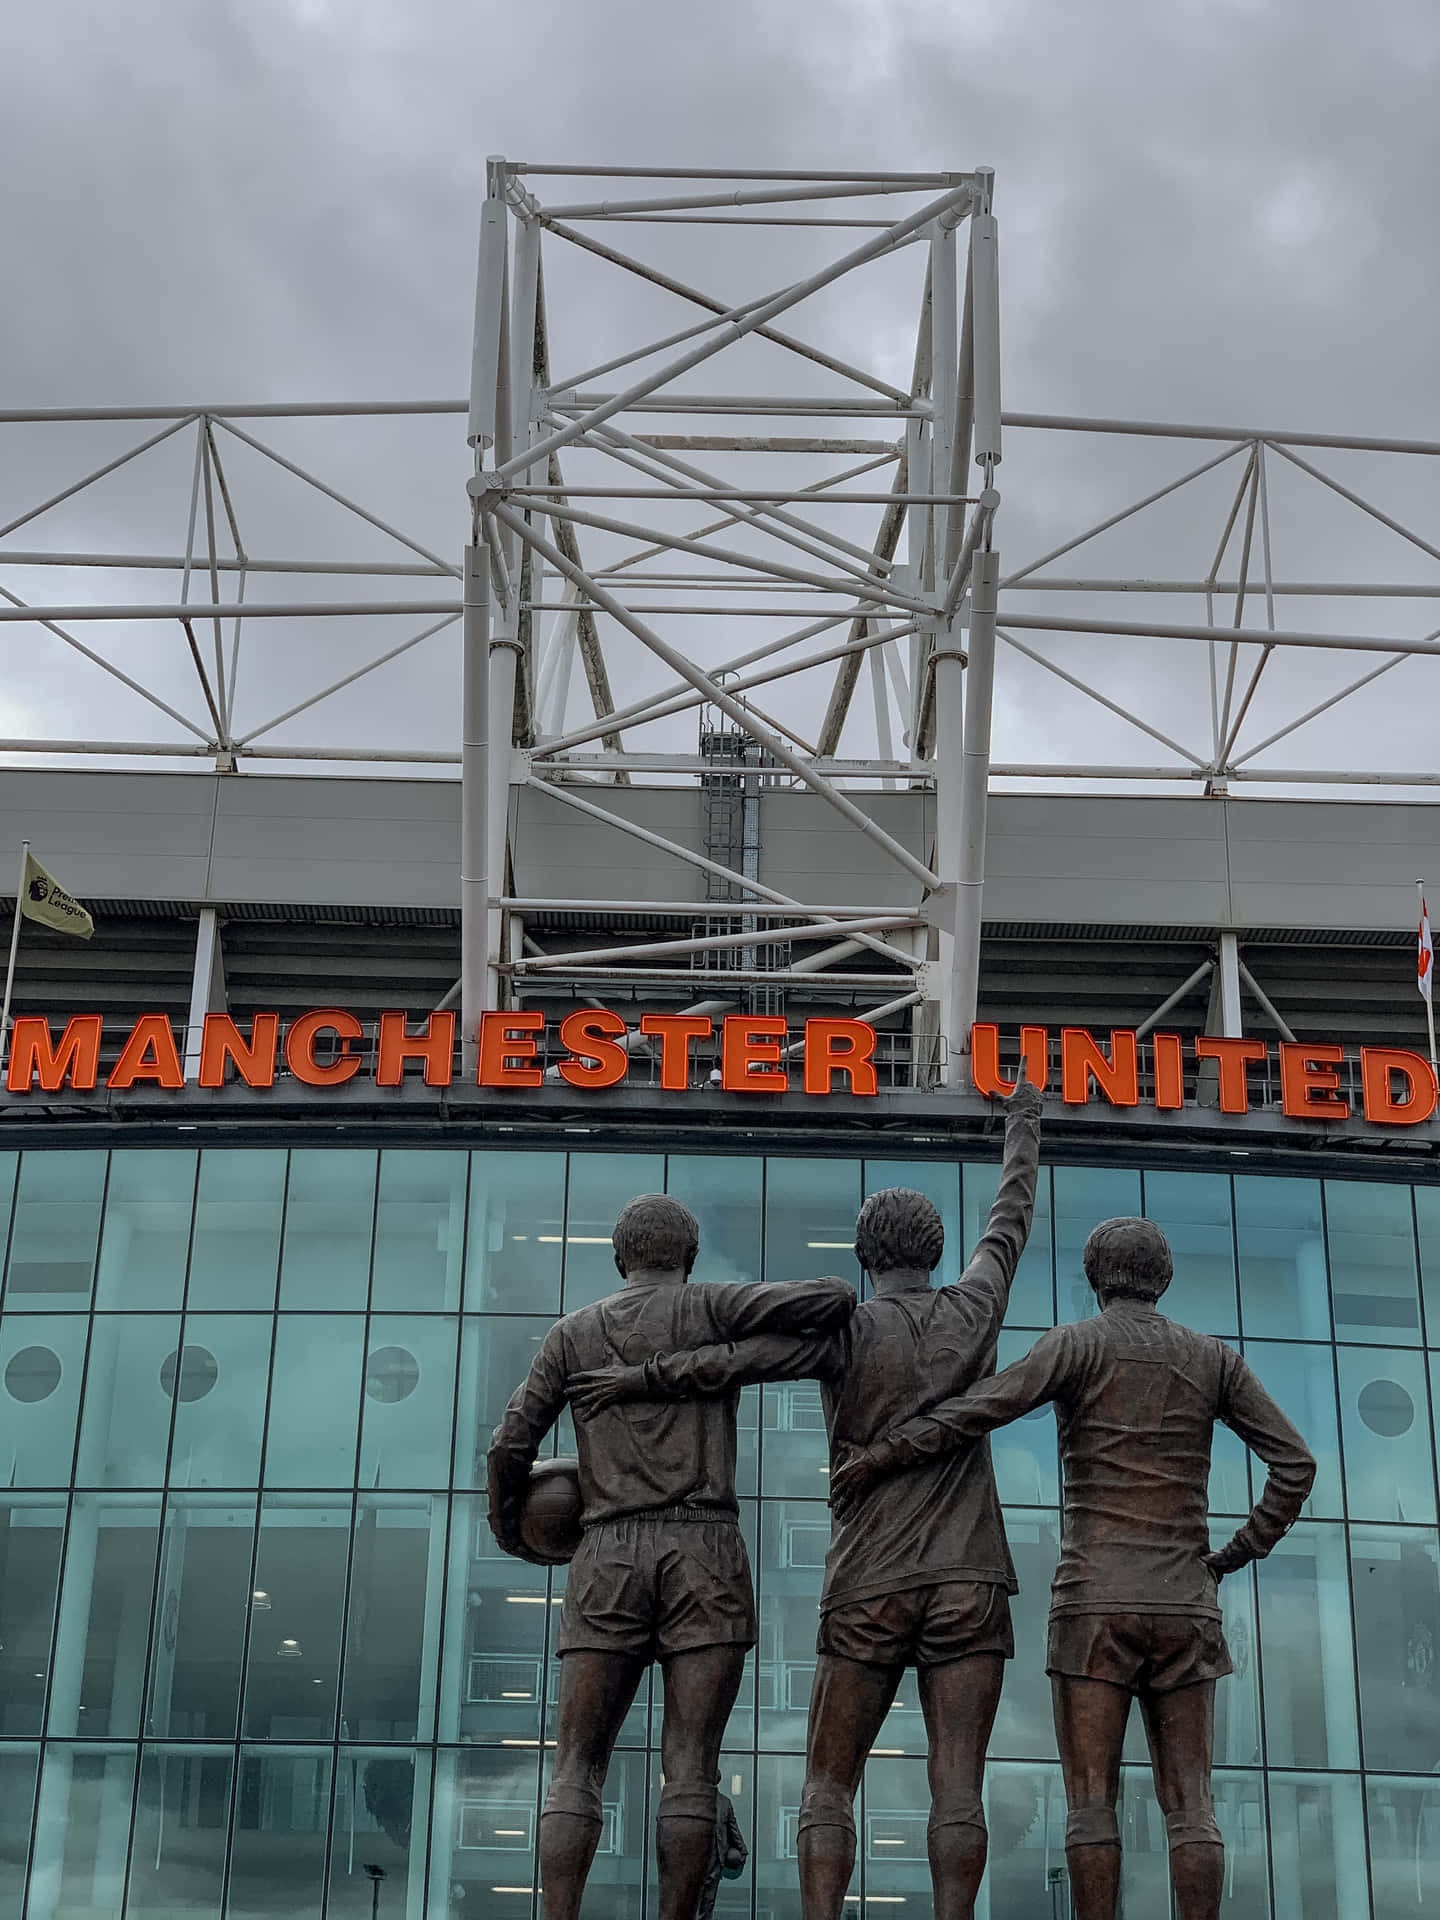 Manchester United Stadiumwith Statue Wallpaper